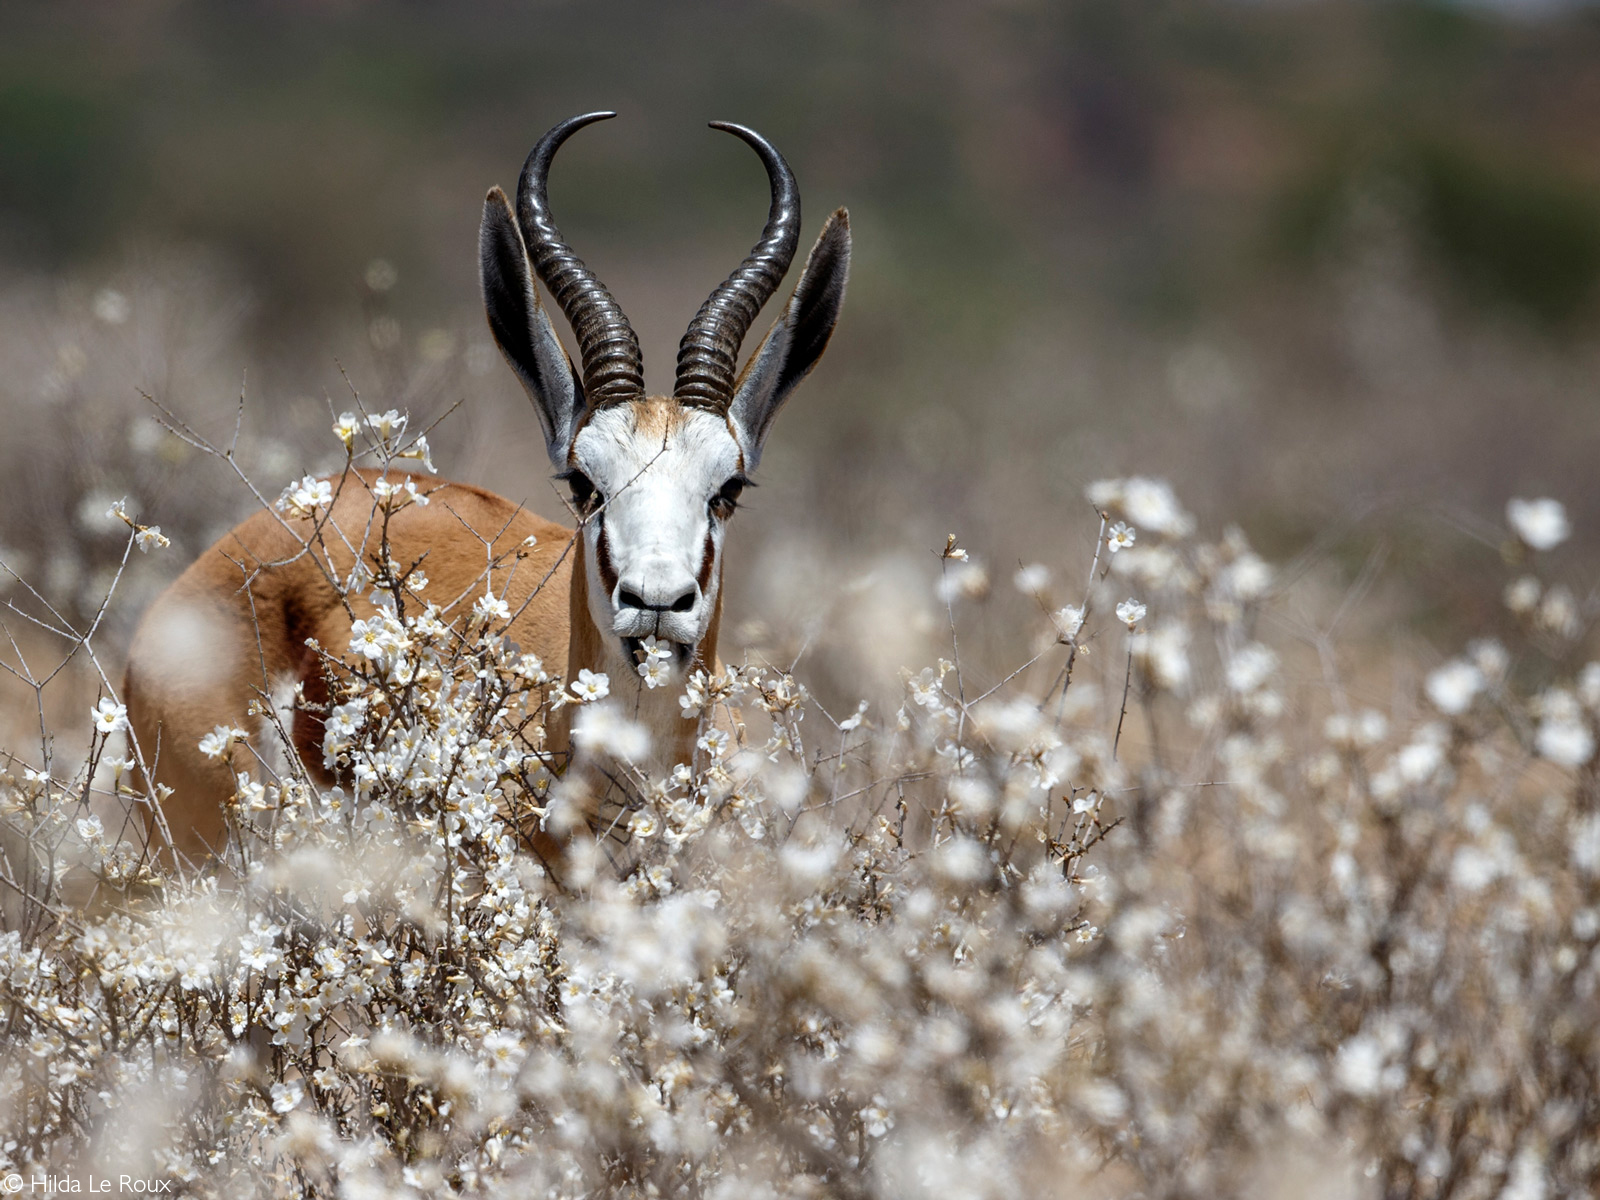 A springbok enjoying the flowers after the first shower of rain. Kgalagadi Transfrontier Park, South Africa © Hilda Le Roux